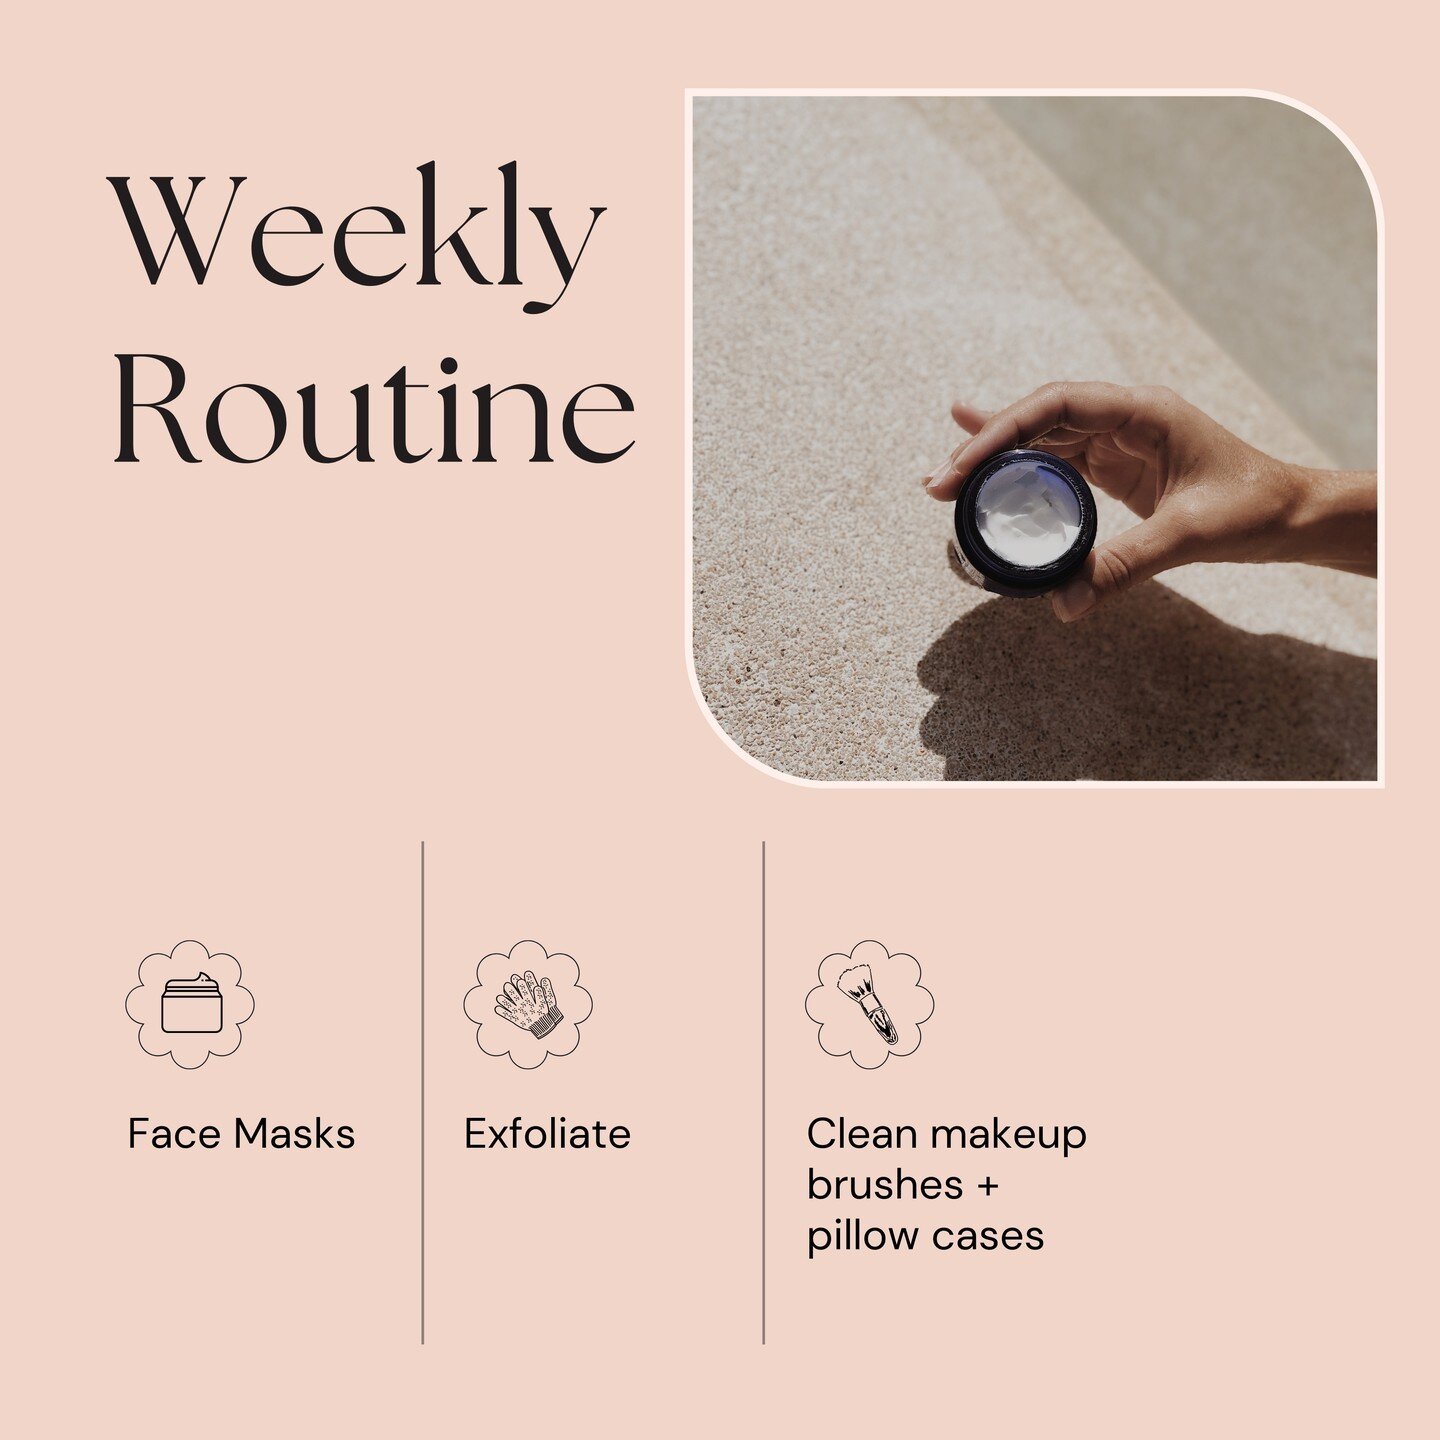 Are you incorporating these steps into your weekly skincare routine? 

👉🏼 Face Masks
👉🏼 Exfoliate
👉🏼 Clean makeup brushes + pillow cases

Save this for later! ✨